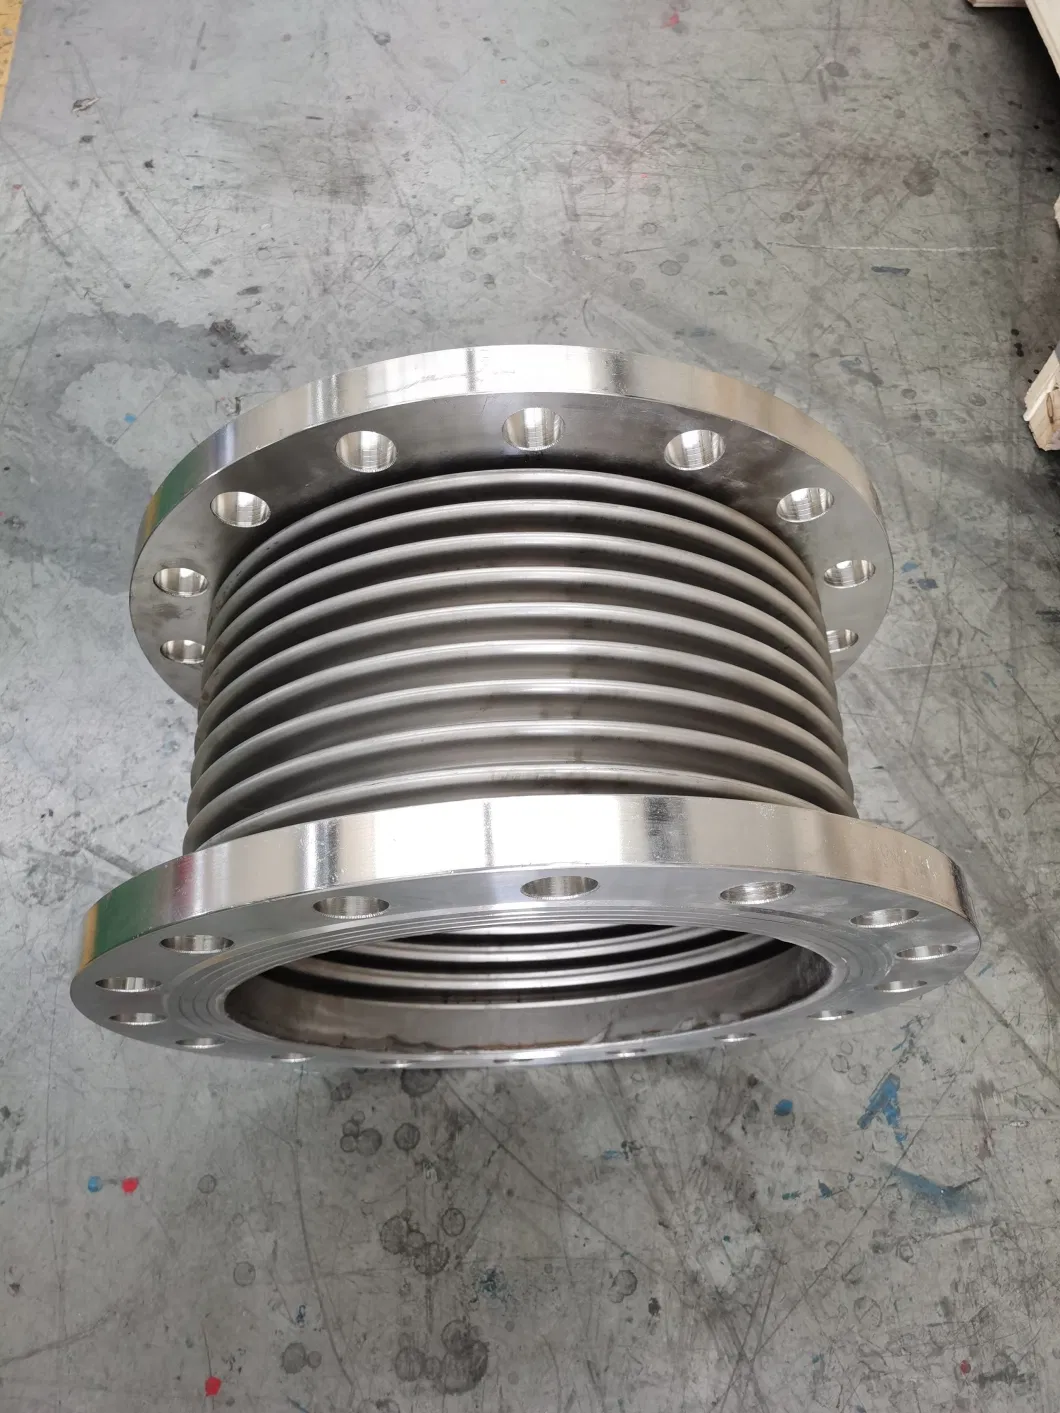 Bellow Hose Bellows Expansion Joint Coupling Stainless Steel Connector Kxt